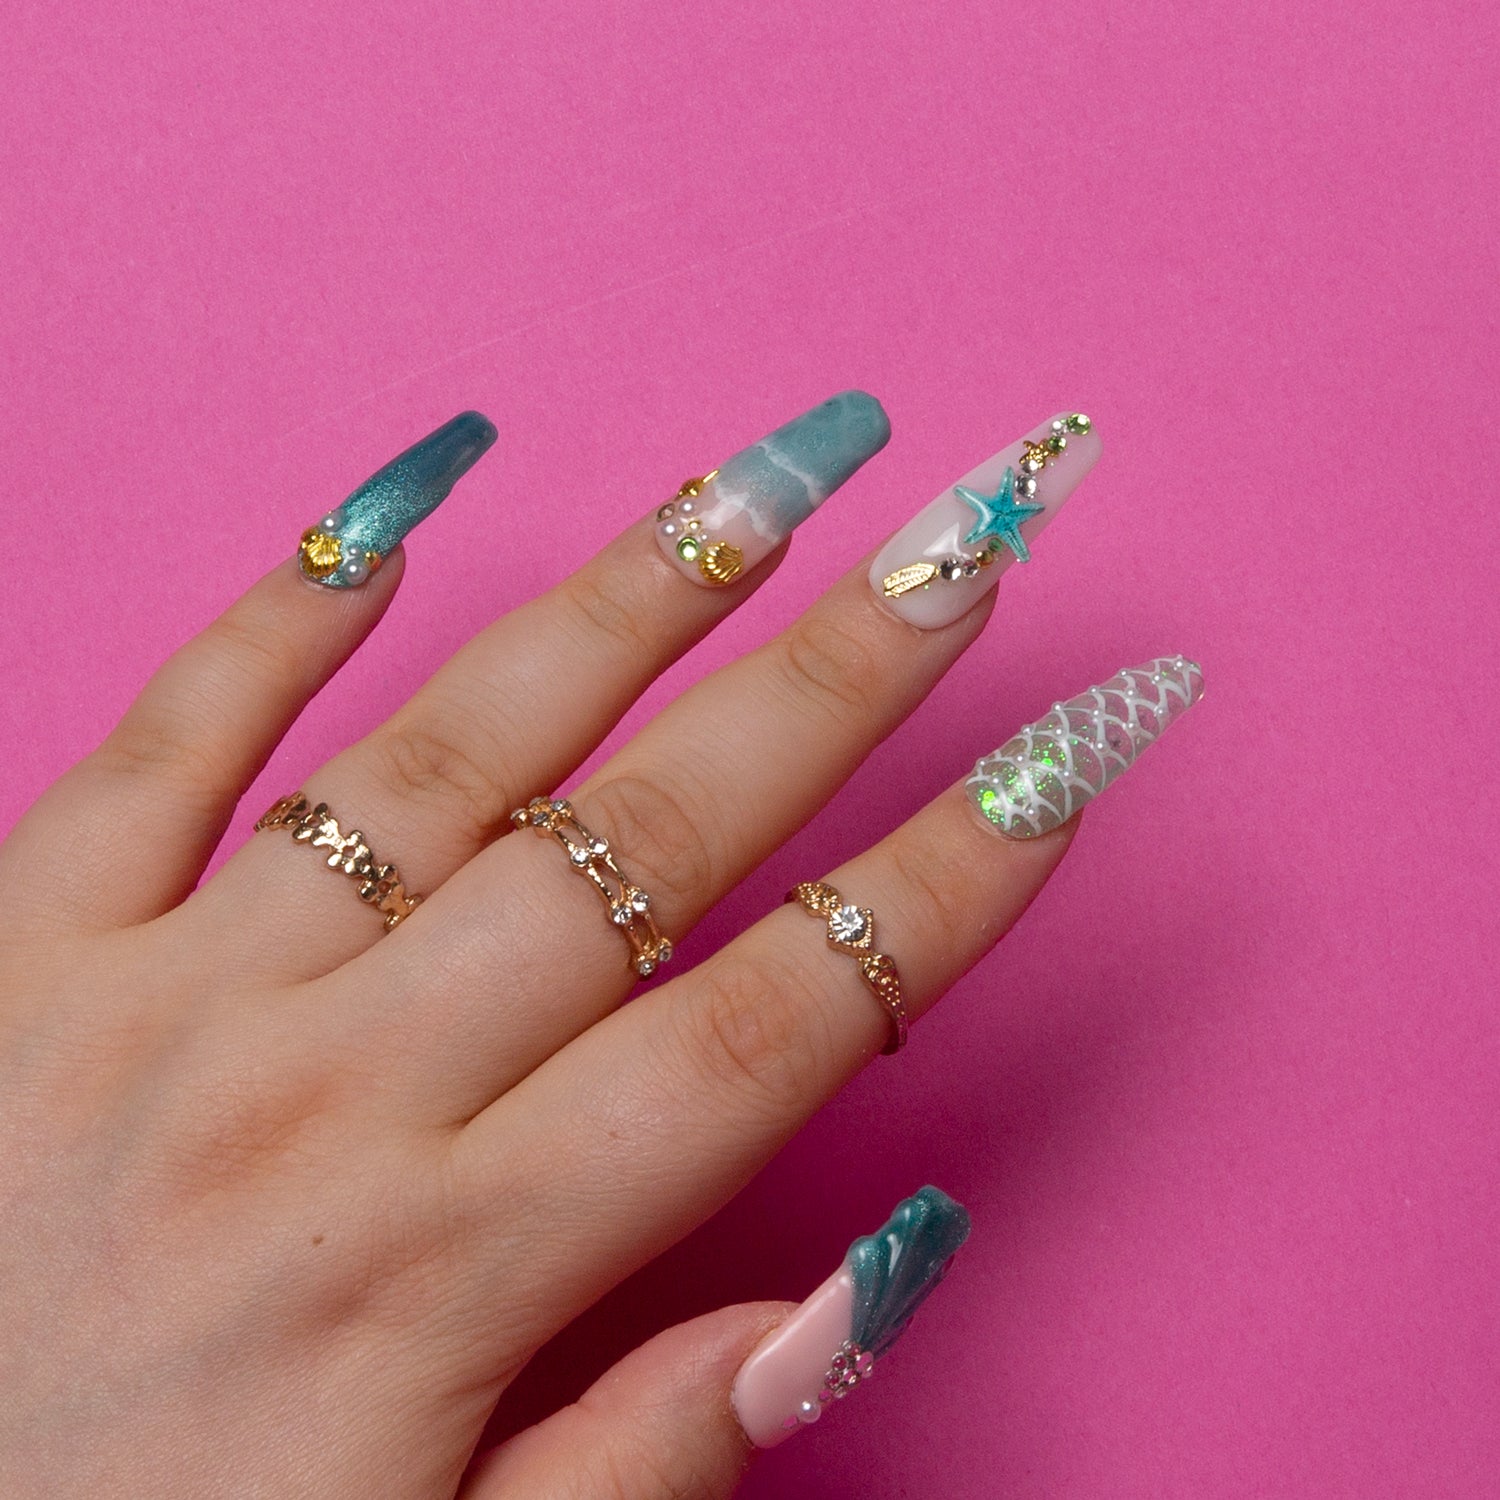 Hand with long coffin-shaped press-on nails in Hawaii sea blue, decorated with starfish and glitter, creating a beach vibe. Gold rings added for elegance. Vibrant pink background.